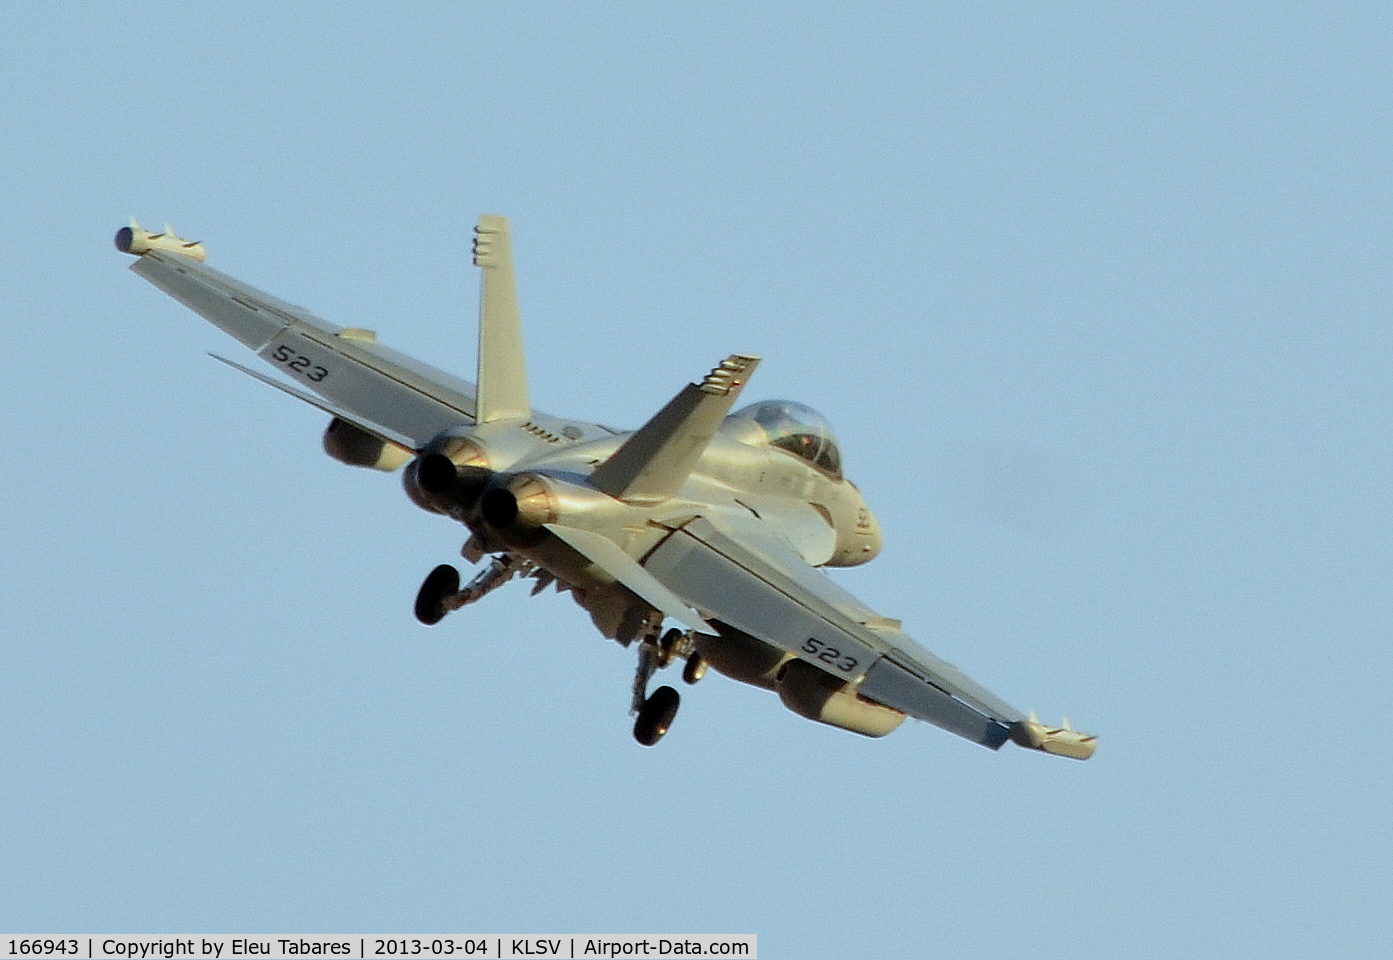 166943, Boeing EA-18G Growler C/N G-28, Taken during Red Flag Exercise at Nellis Air Force Base, Nevada.